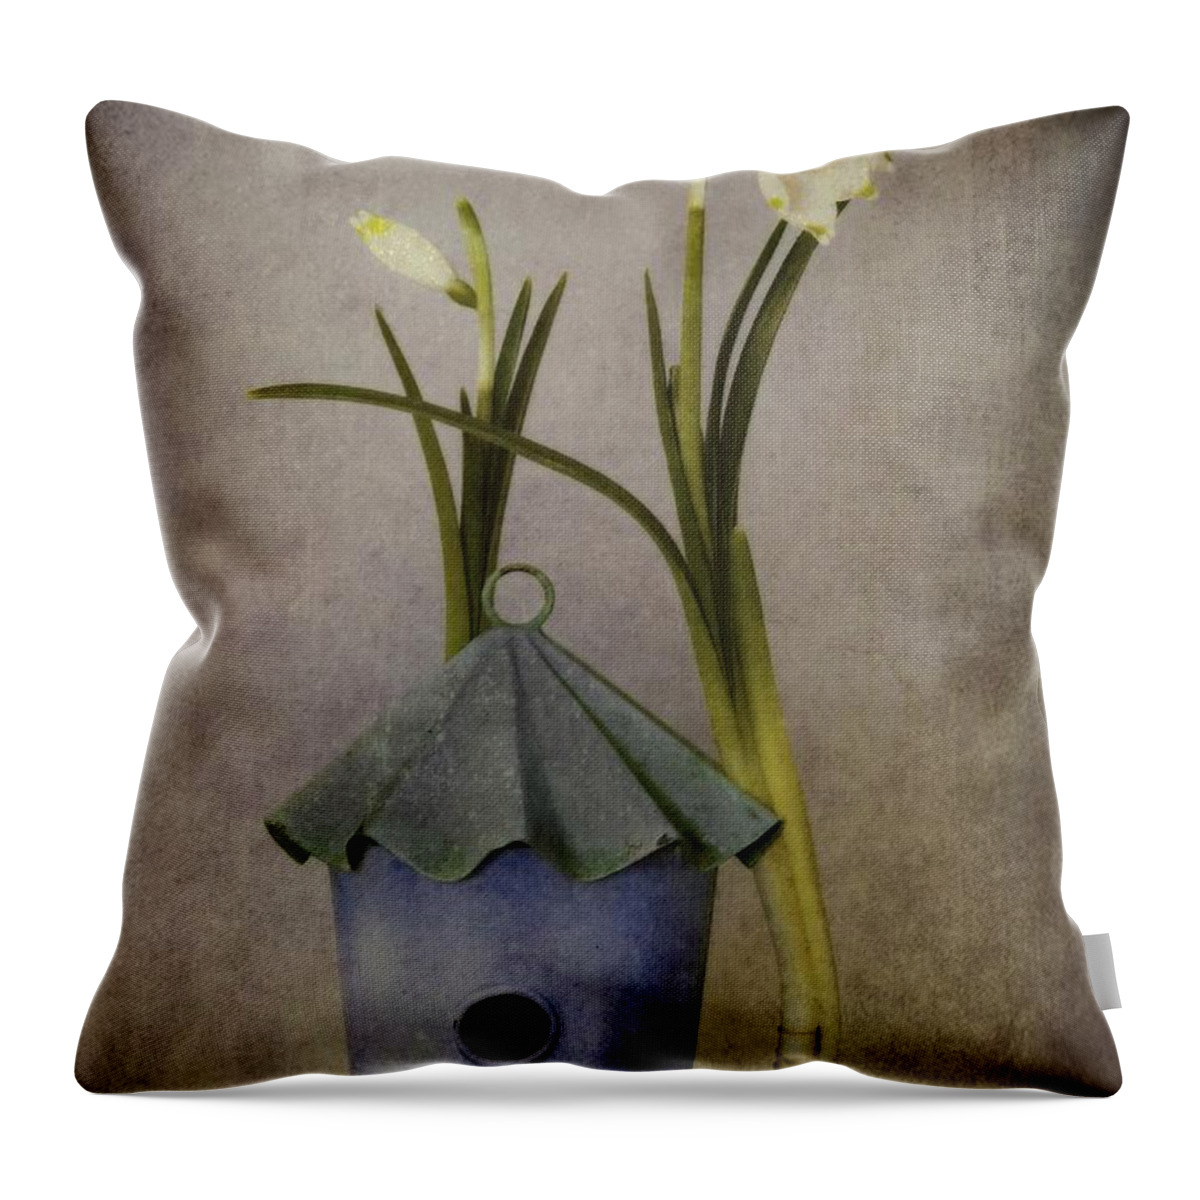 Still Life Throw Pillow featuring the photograph March by Priska Wettstein